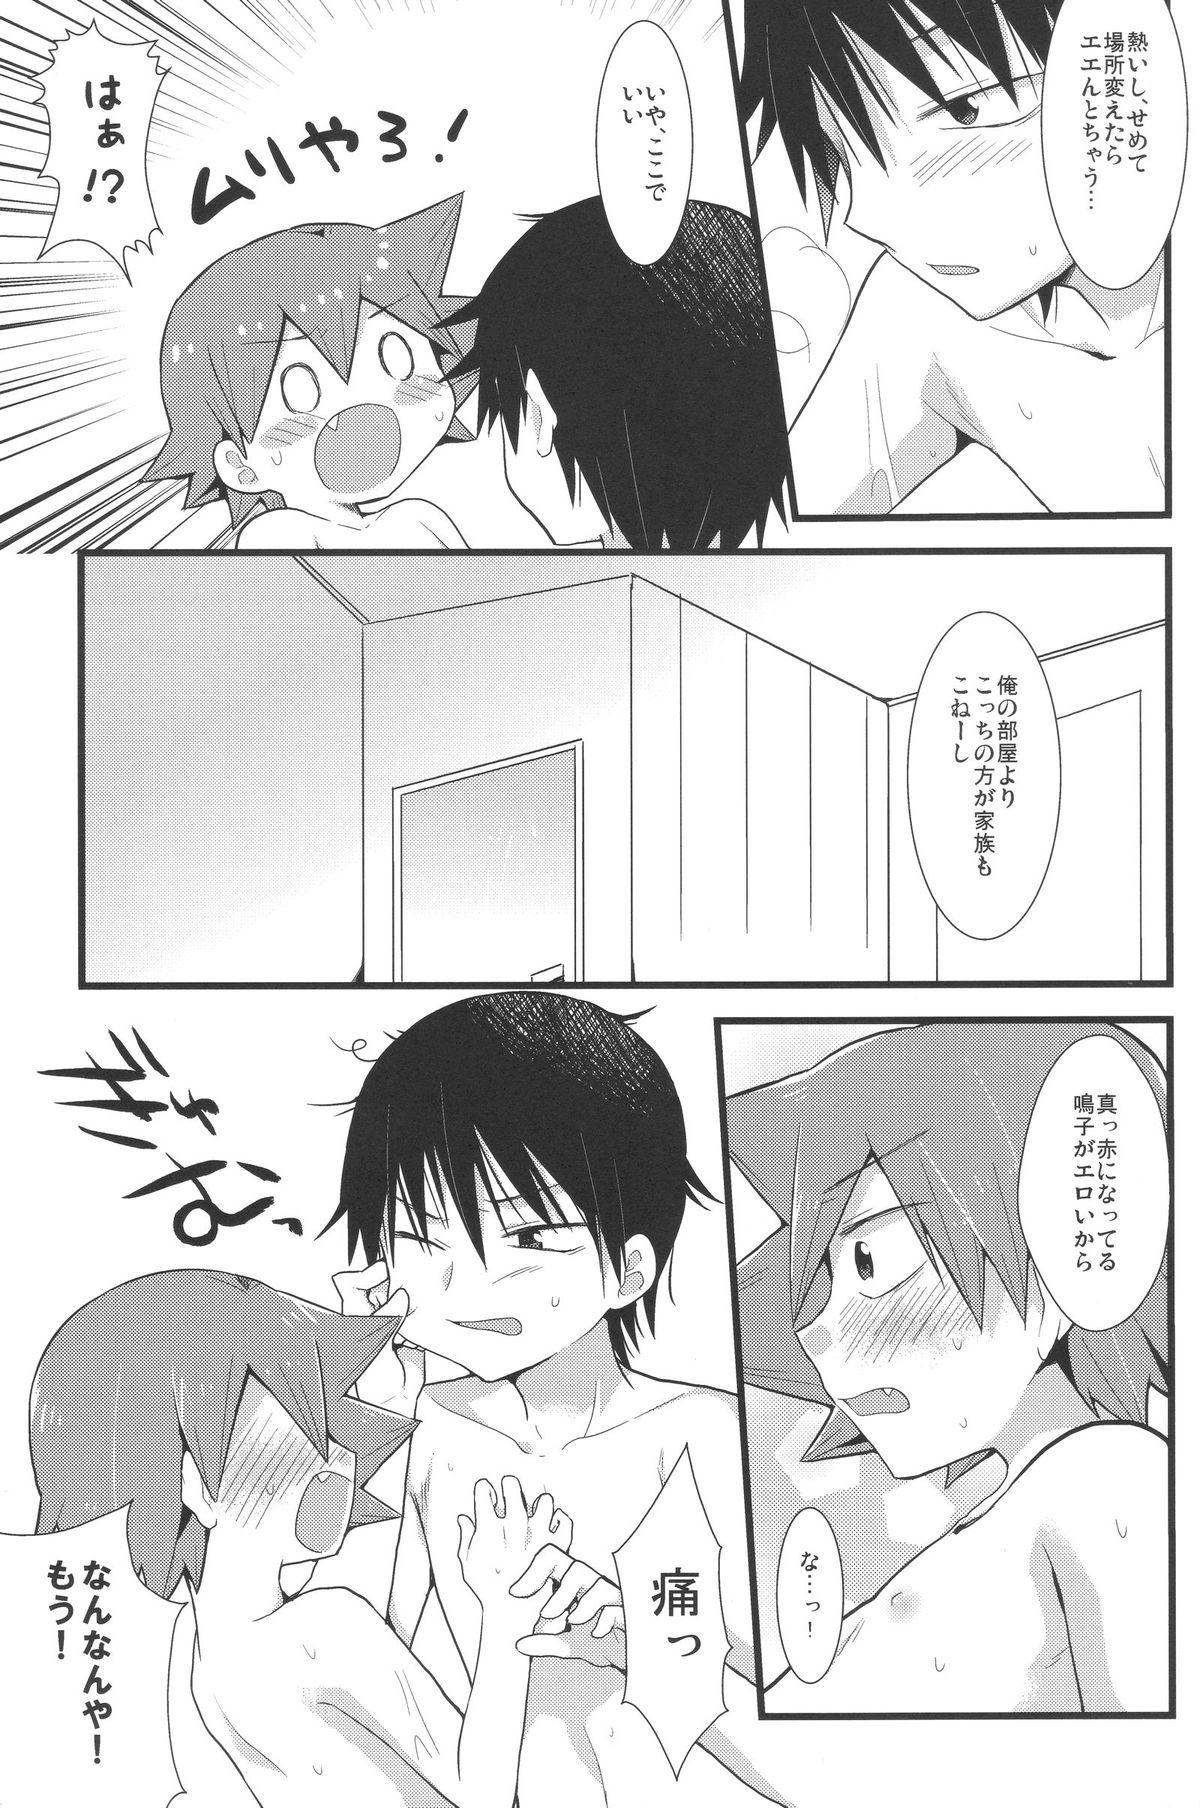 Cheating Wife HOTTEST SWEAT - Yowamushi pedal Red Head - Page 10